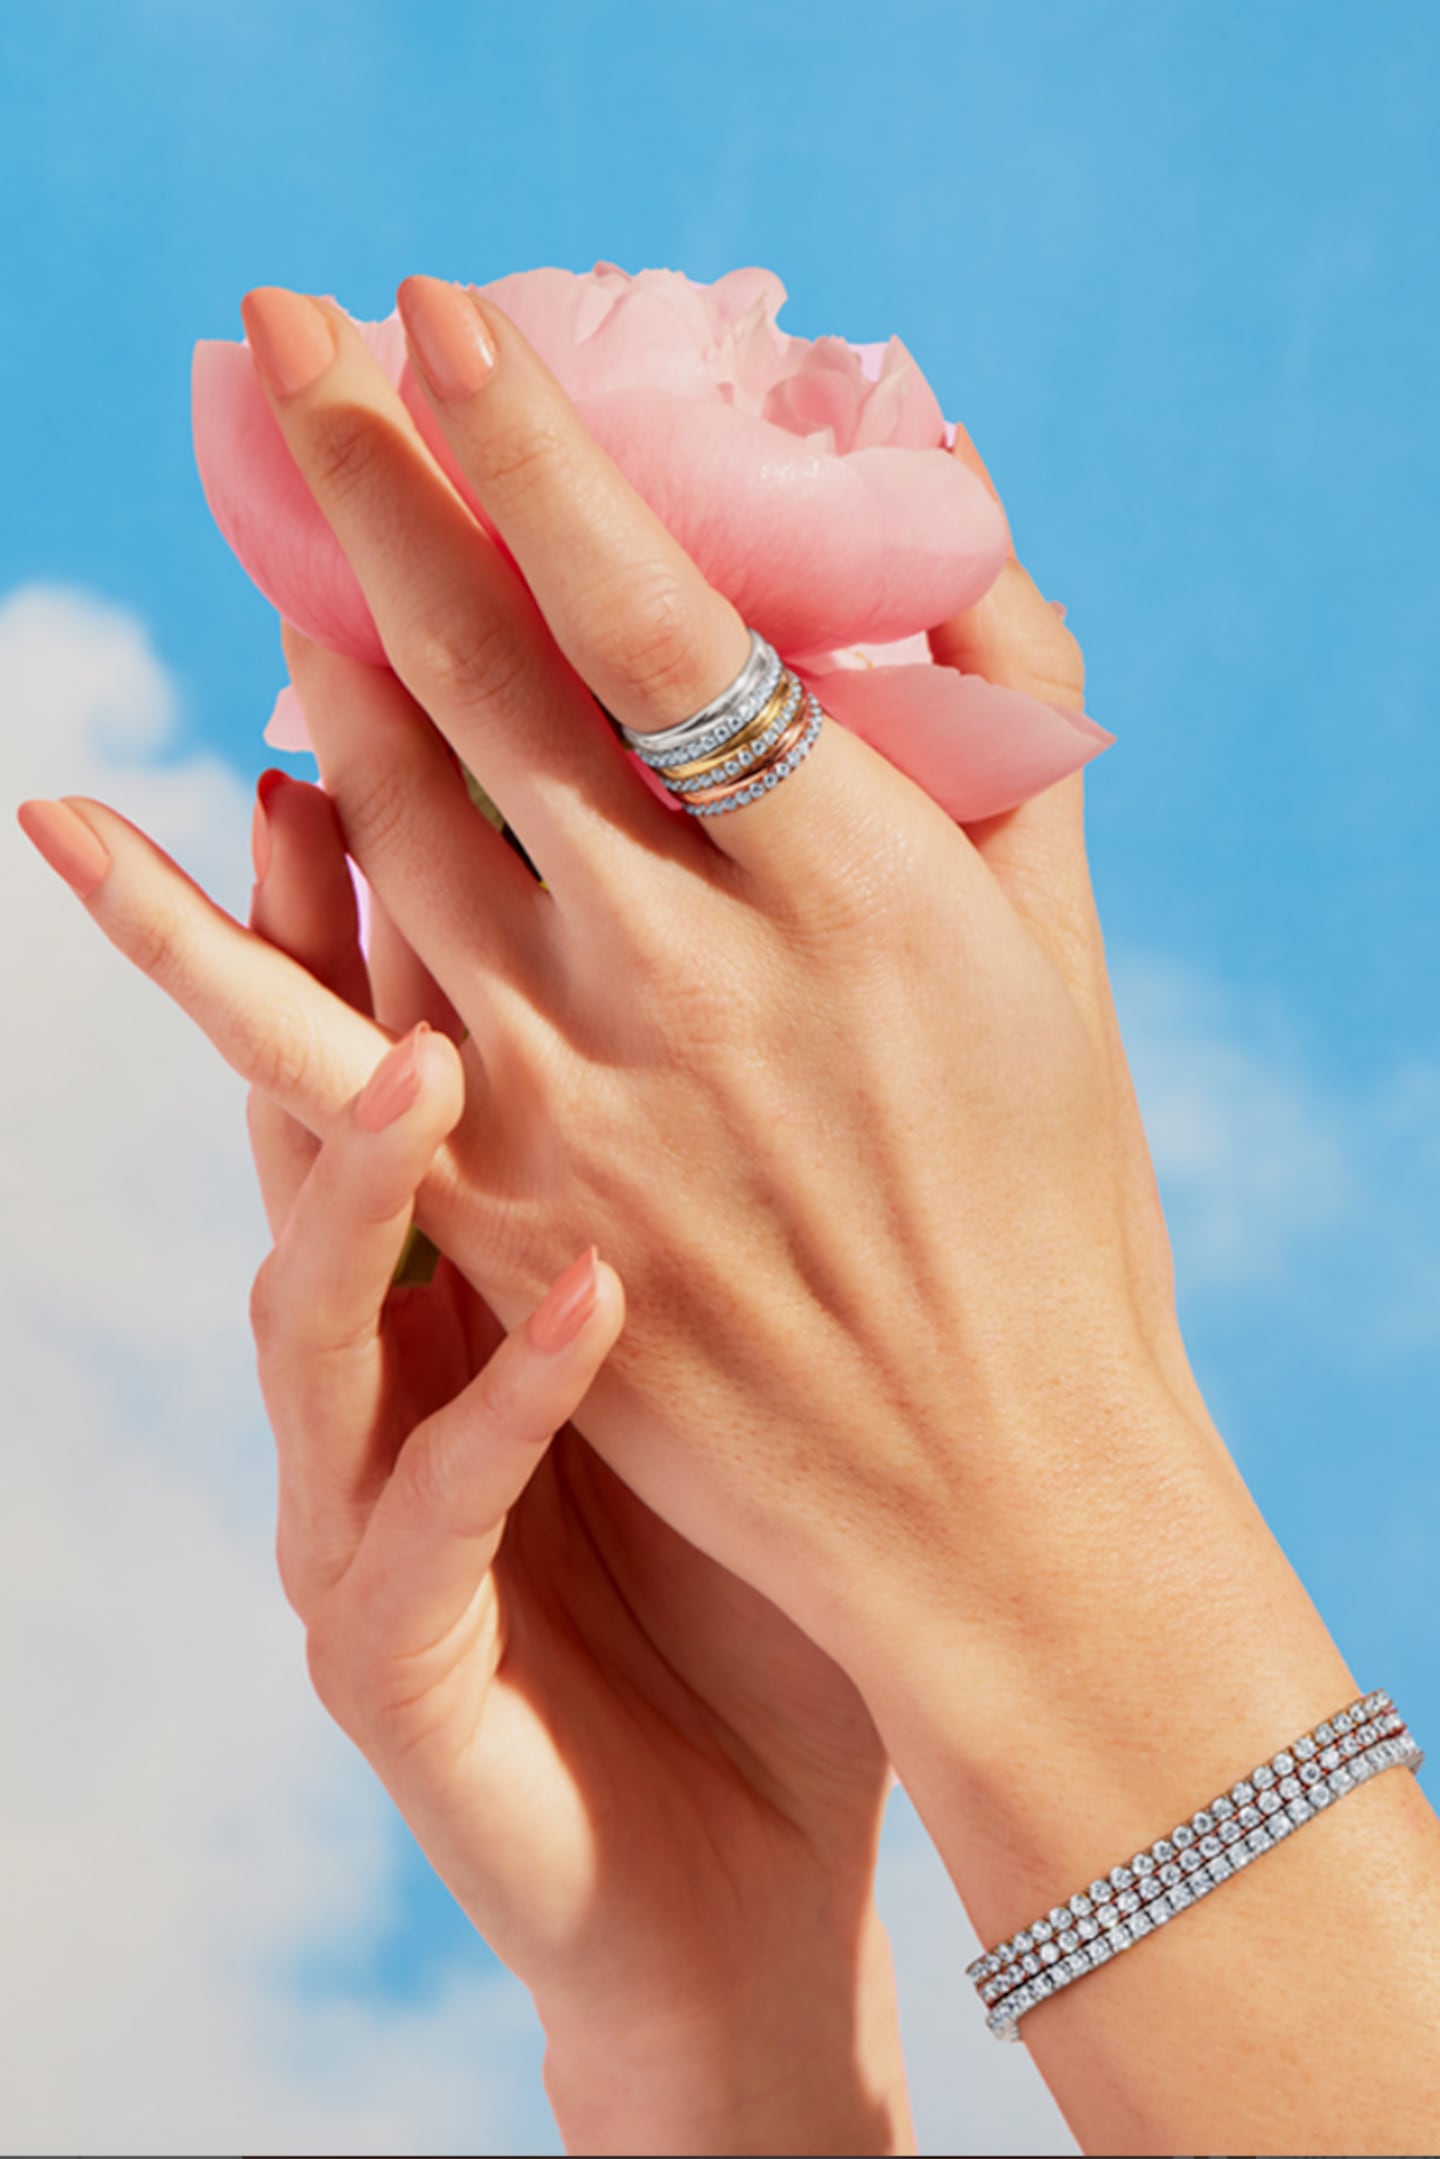 Two hands cup a pink rose against a blue sky. One finger and wrist are bejewelled with diamond-encrusted rings and bracelets.